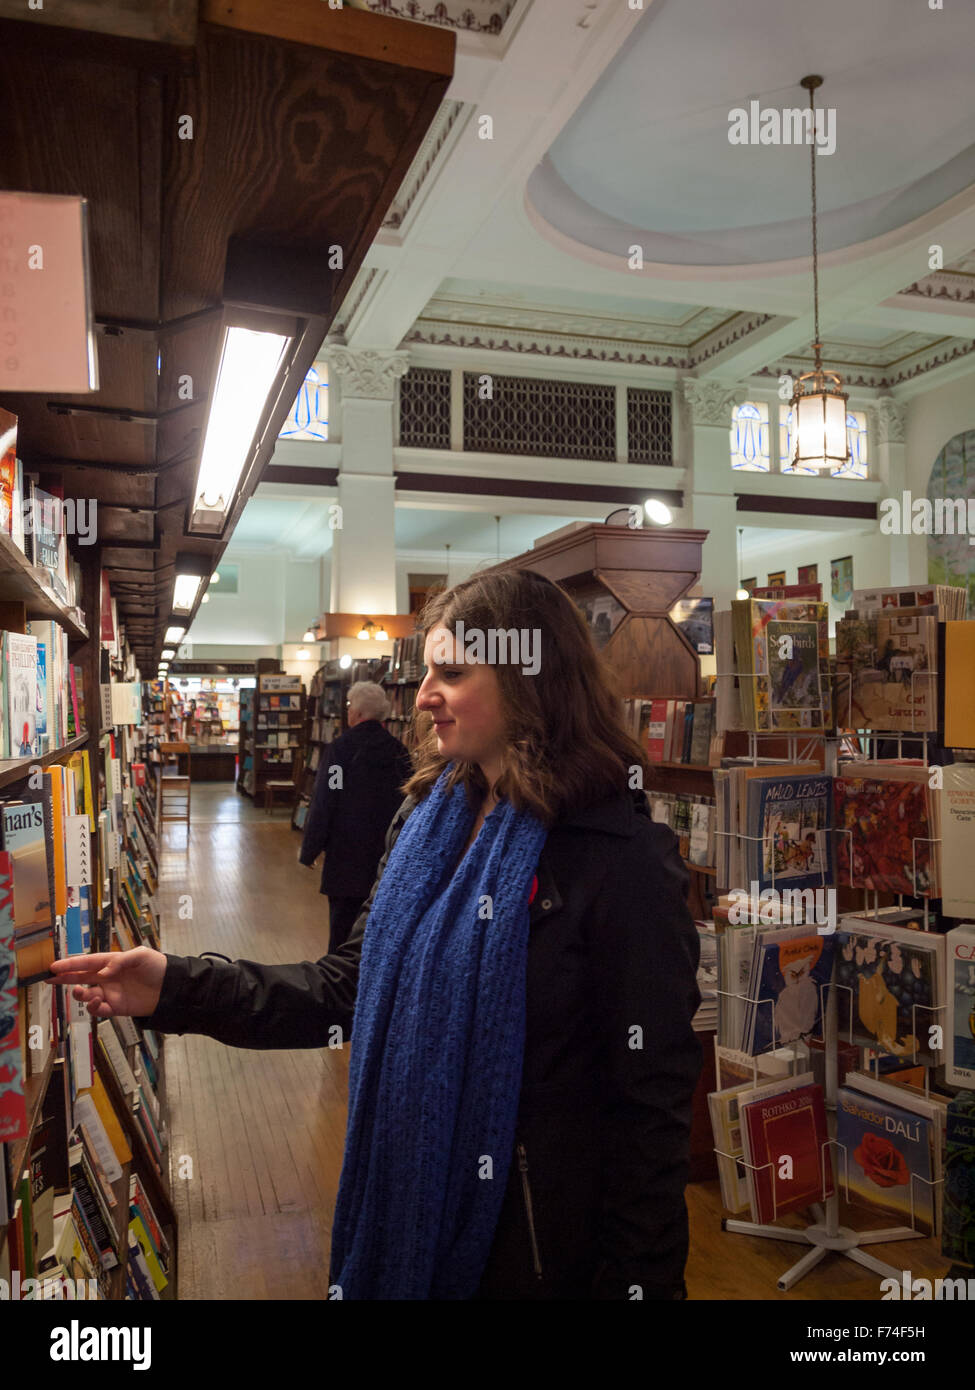 A customer browses the shelves at Munro's Books, a large independent books store in Victoria, British Columbia, Canada. Stock Photo